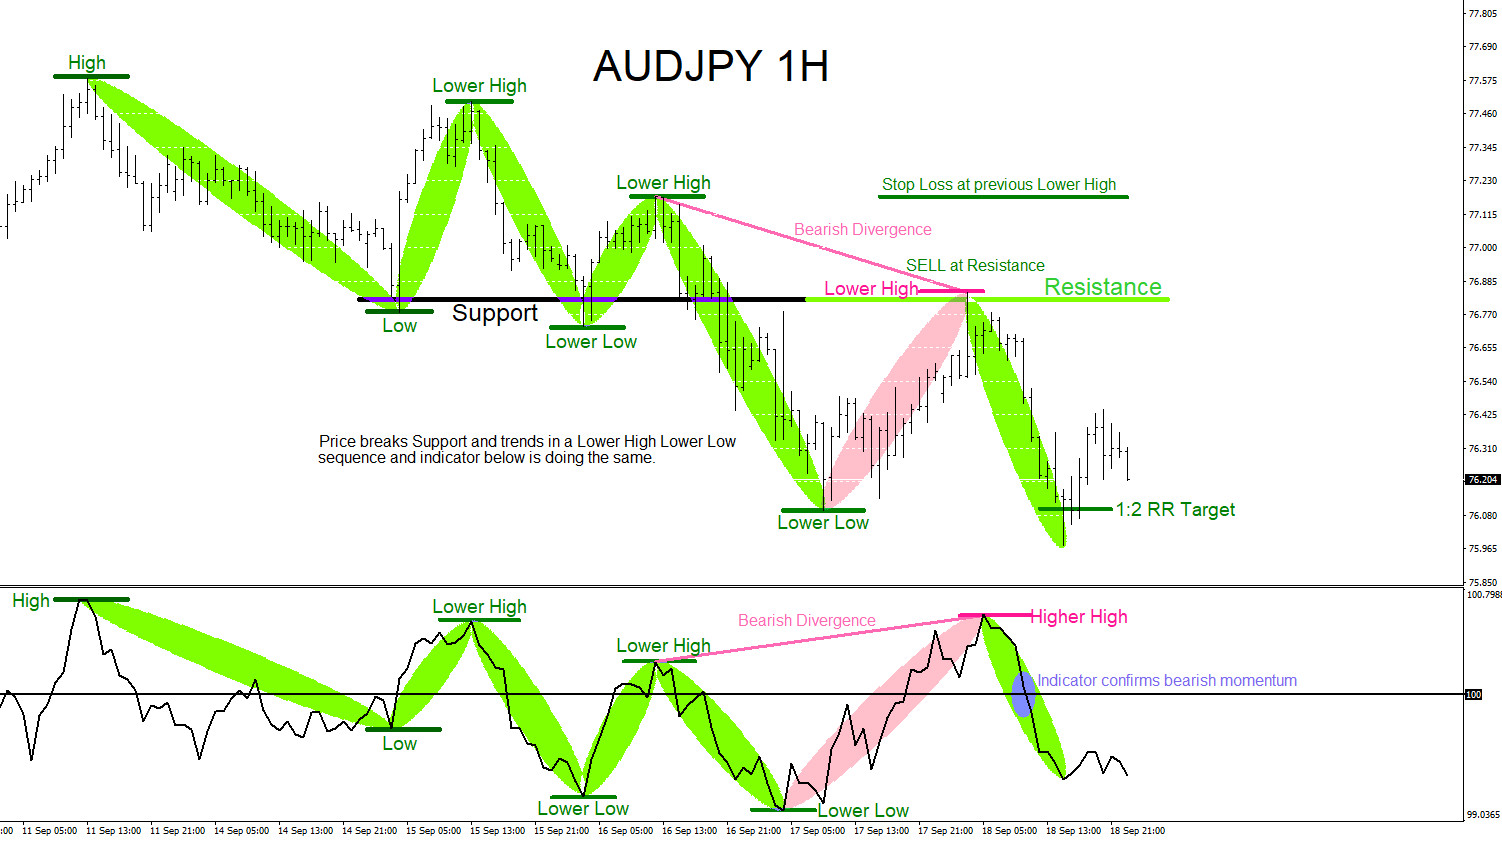 AUDJPY : Support Becomes Resistance